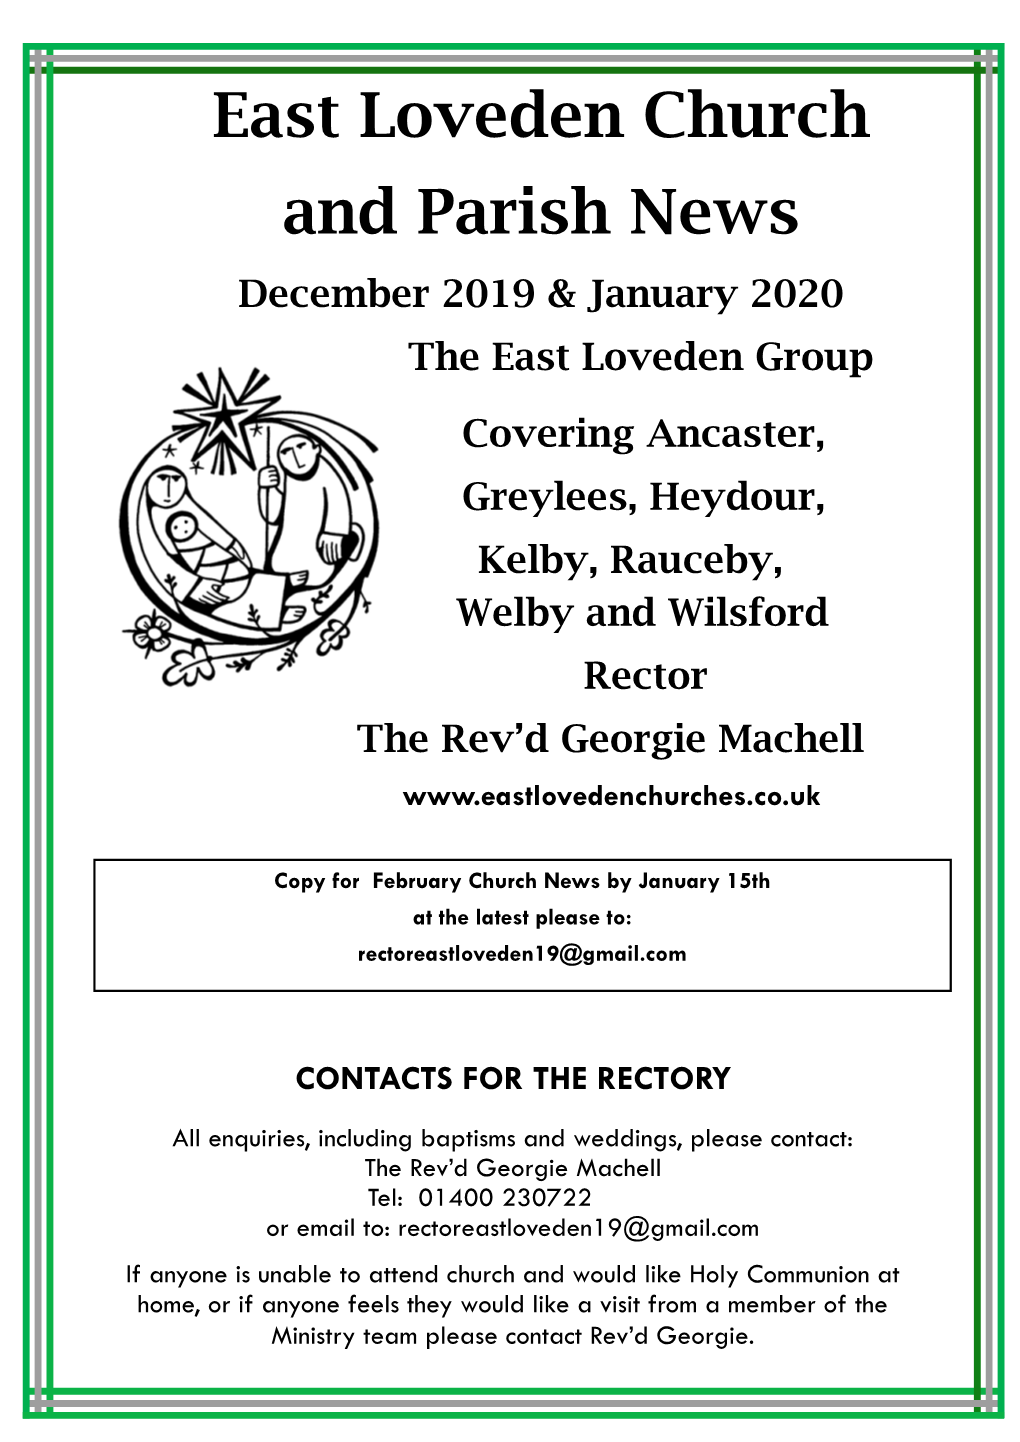 East Loveden Church and Parish News December 2019 & January 2020 the East Loveden Group